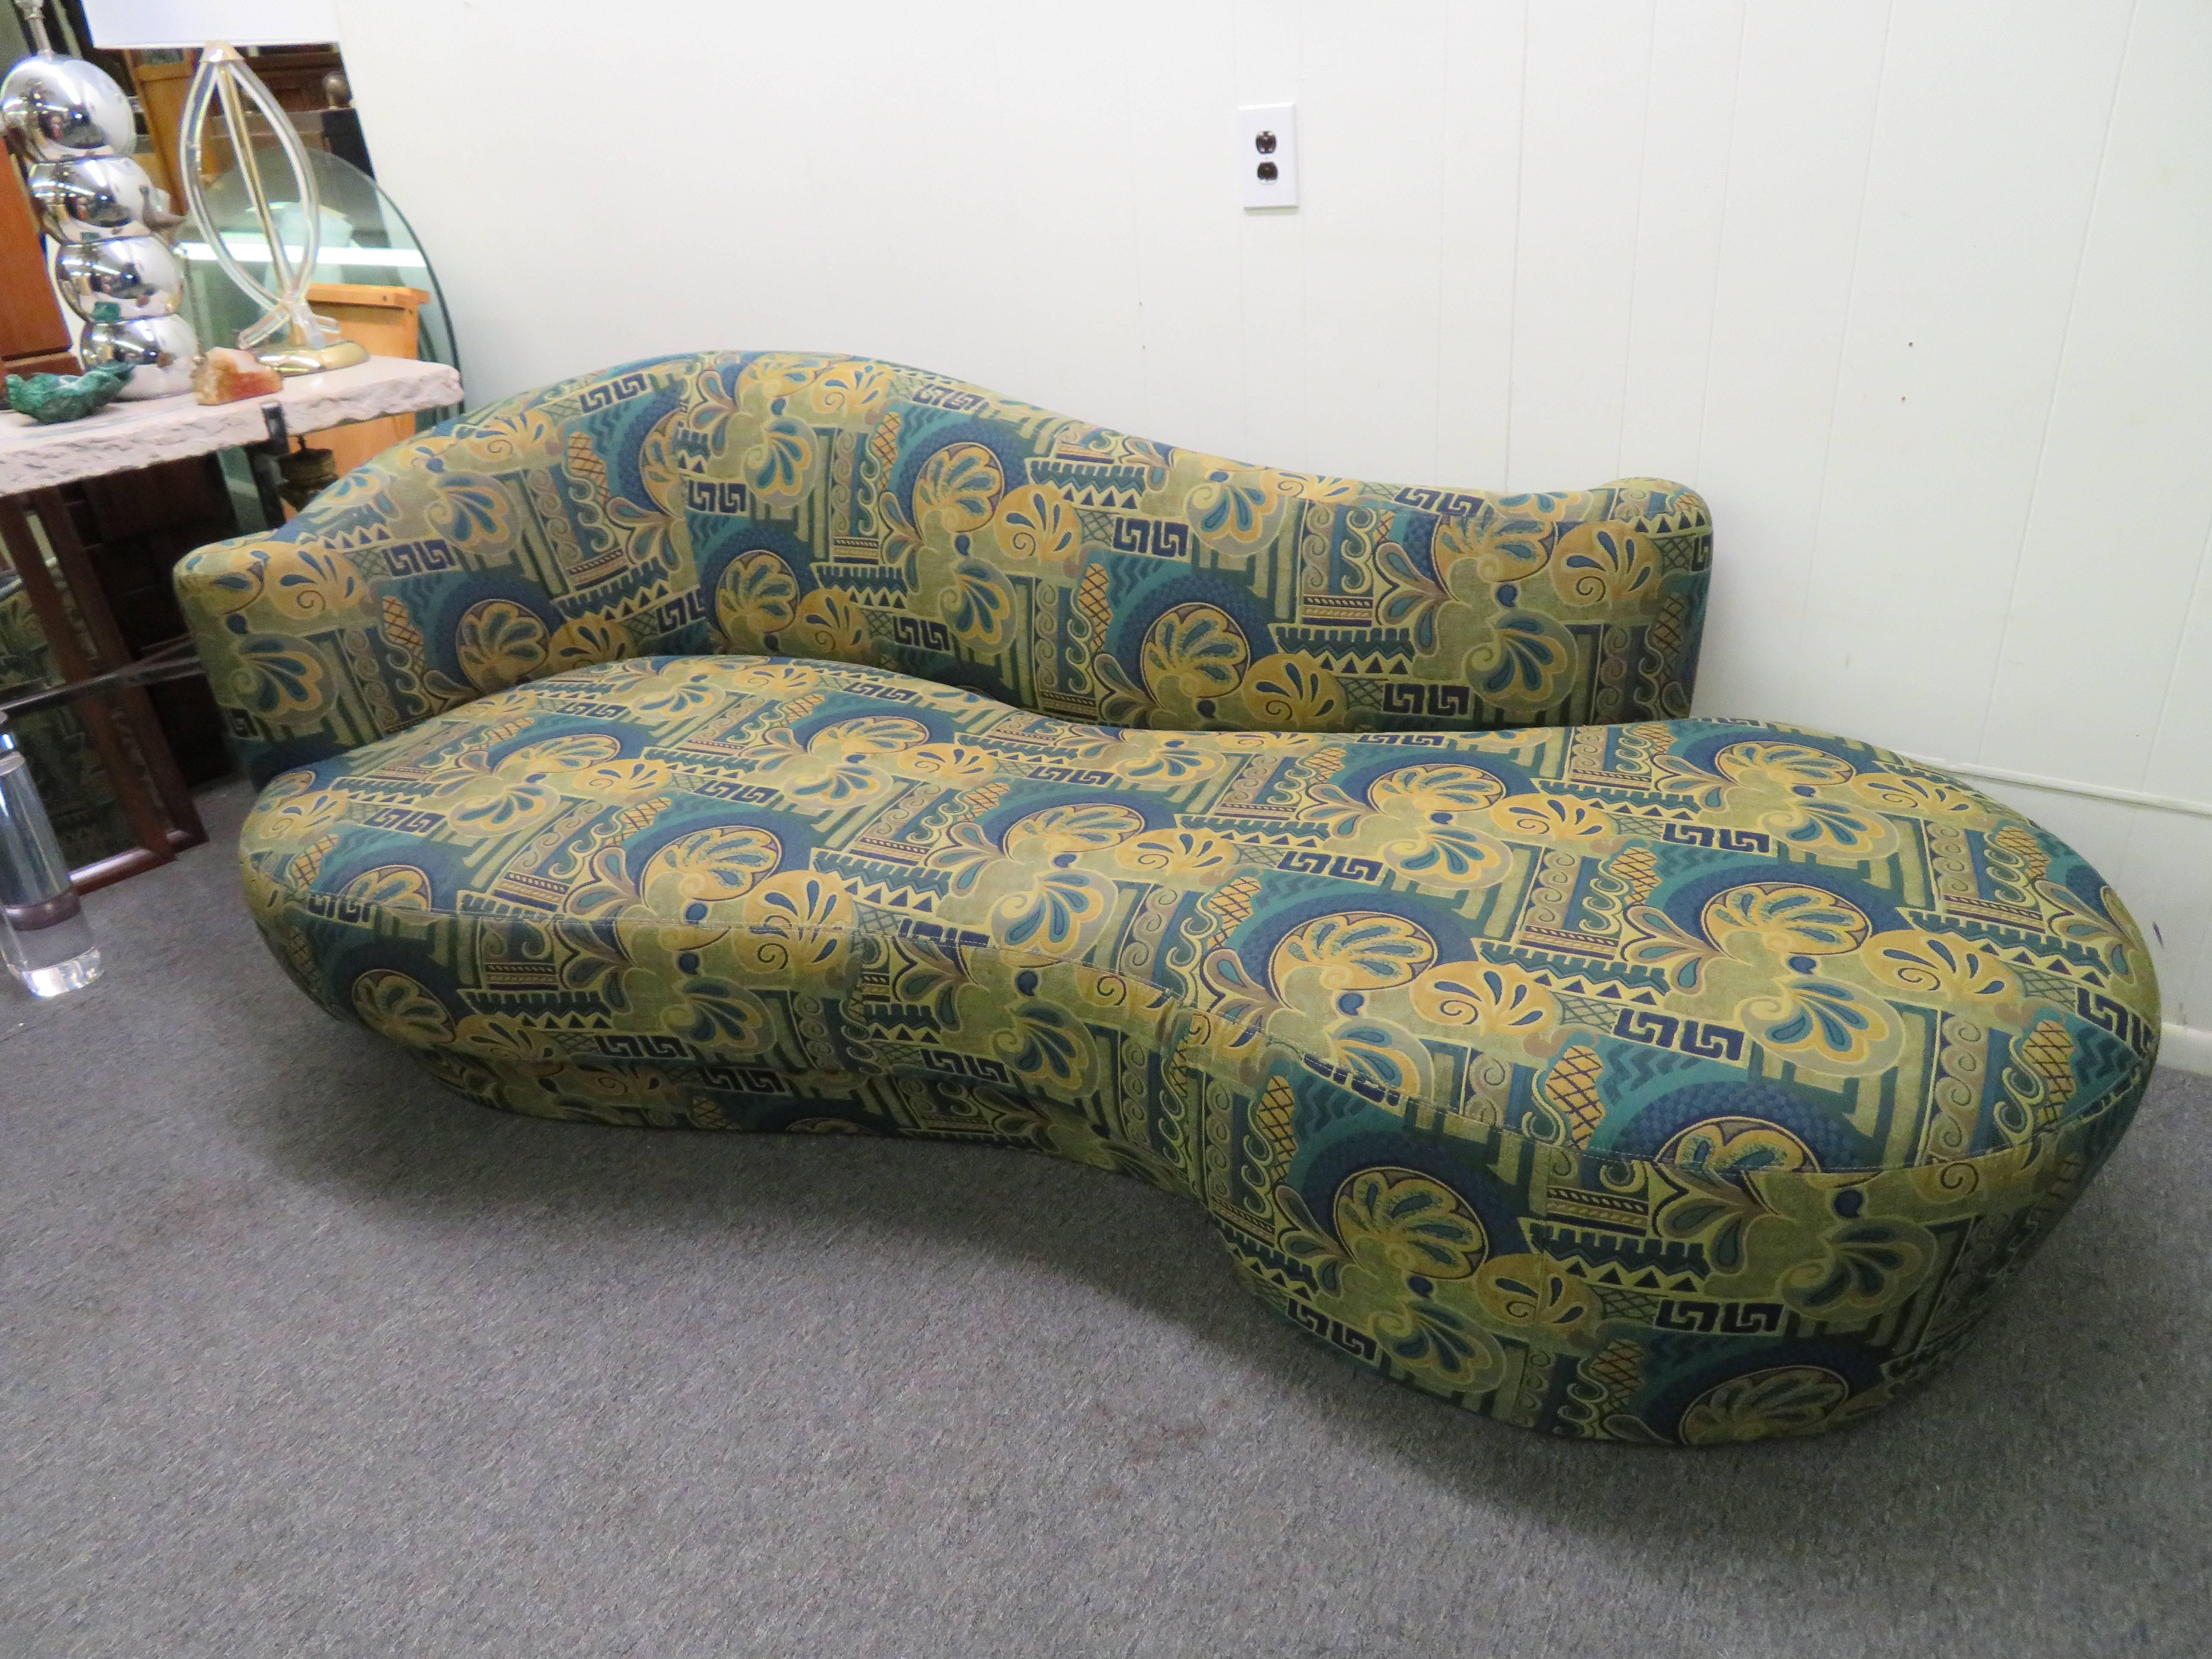 Fabulous Vladimir Kagan designed kidney shaped sofa with gorgeous scrolled back. Original fabric is in great vintage condition and looks fabulous. Weiman label is on the underside.